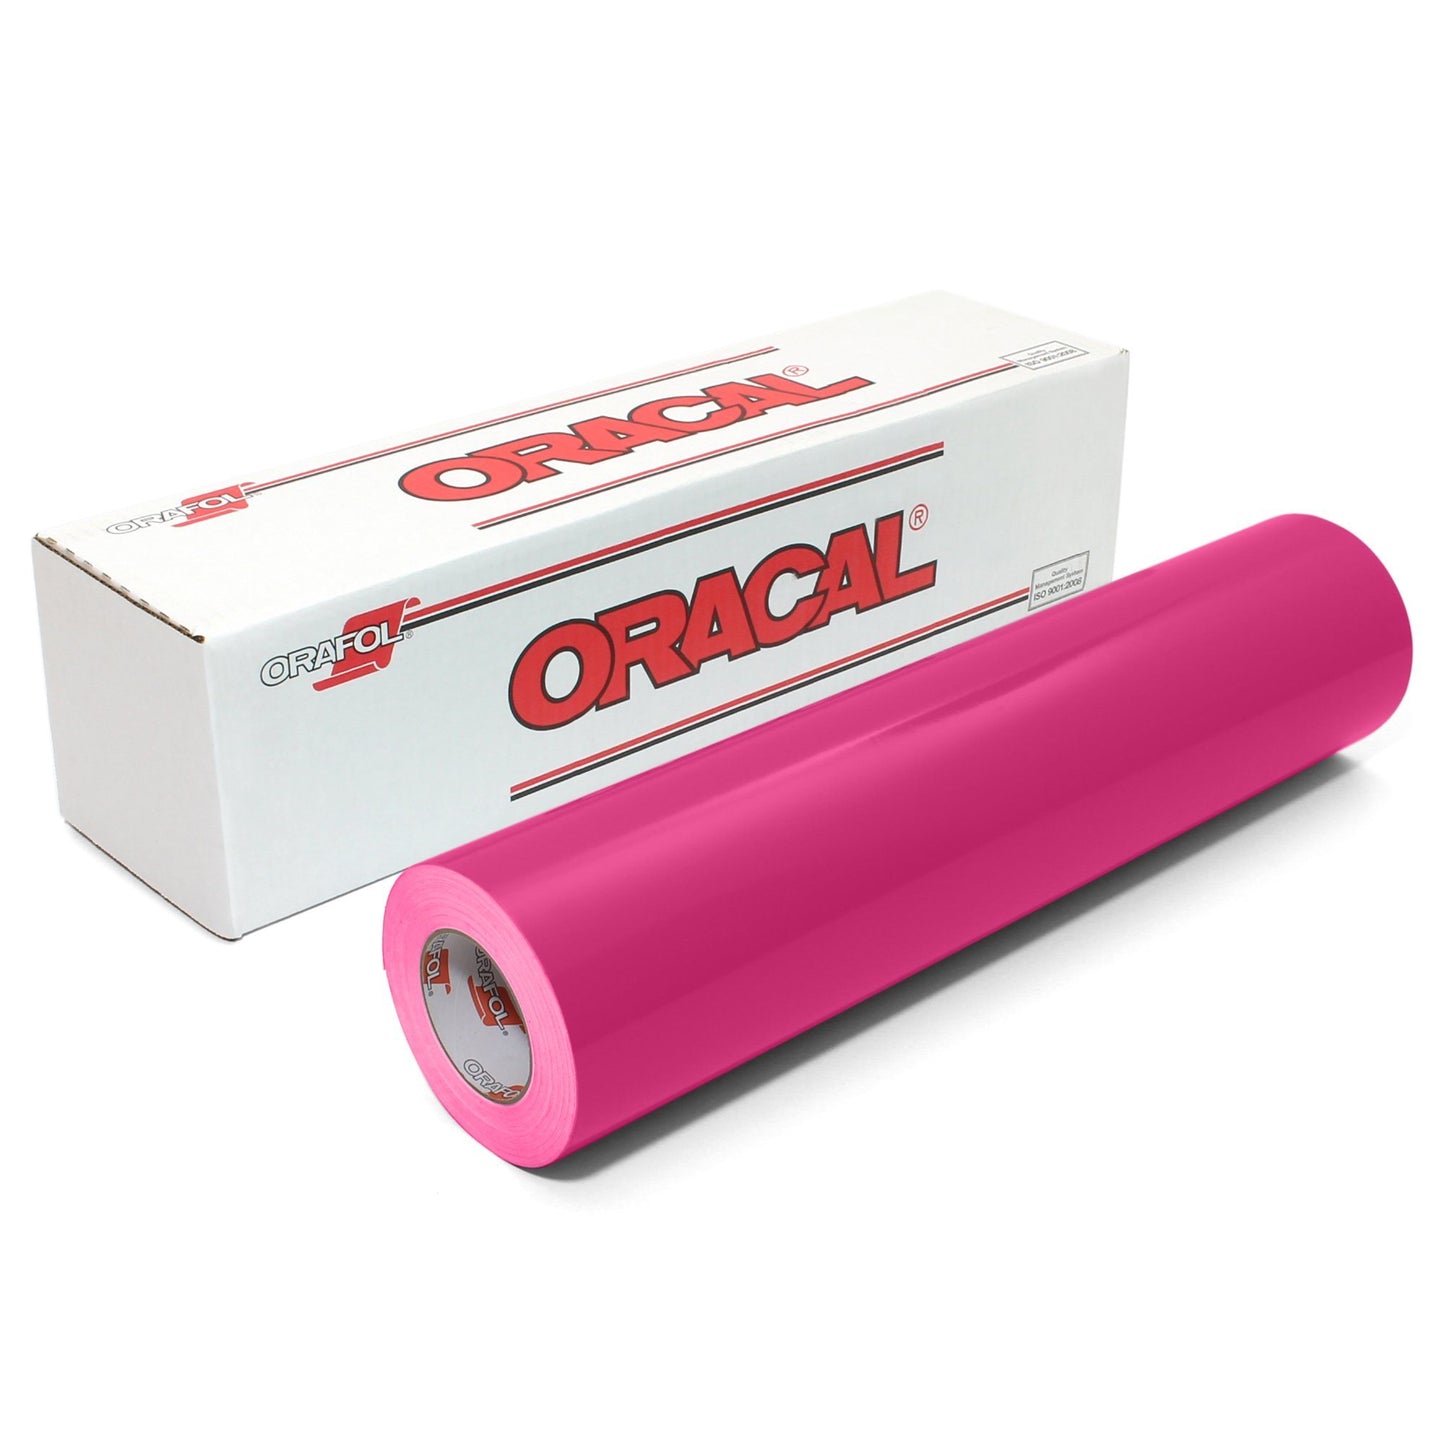 Oracal 651 Glossy 12" x 6 ft Vinyl Rolls - 61 Colors